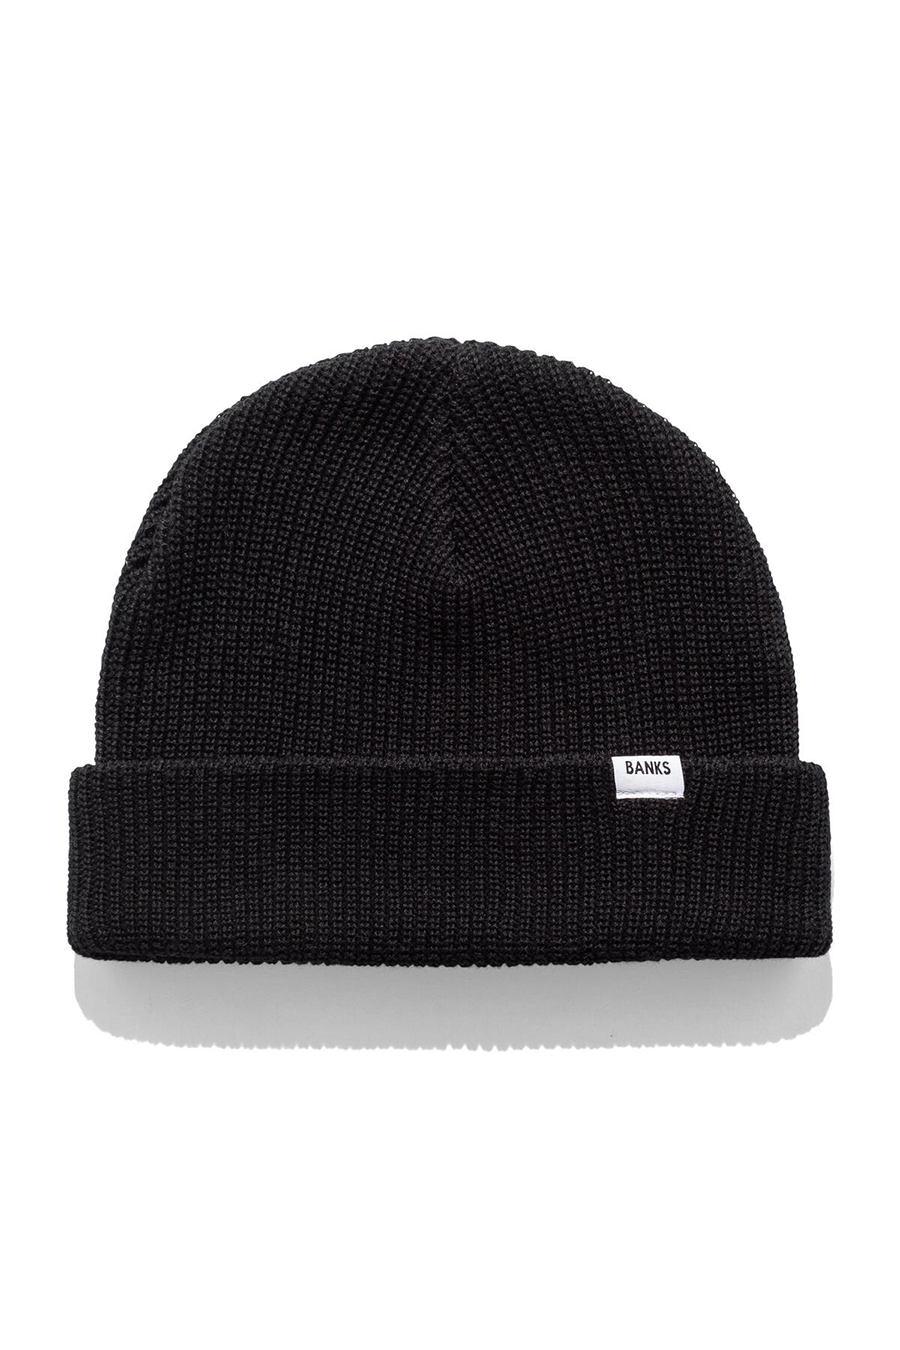 Primary Beanie | Black - Main Image Number 2 of 3